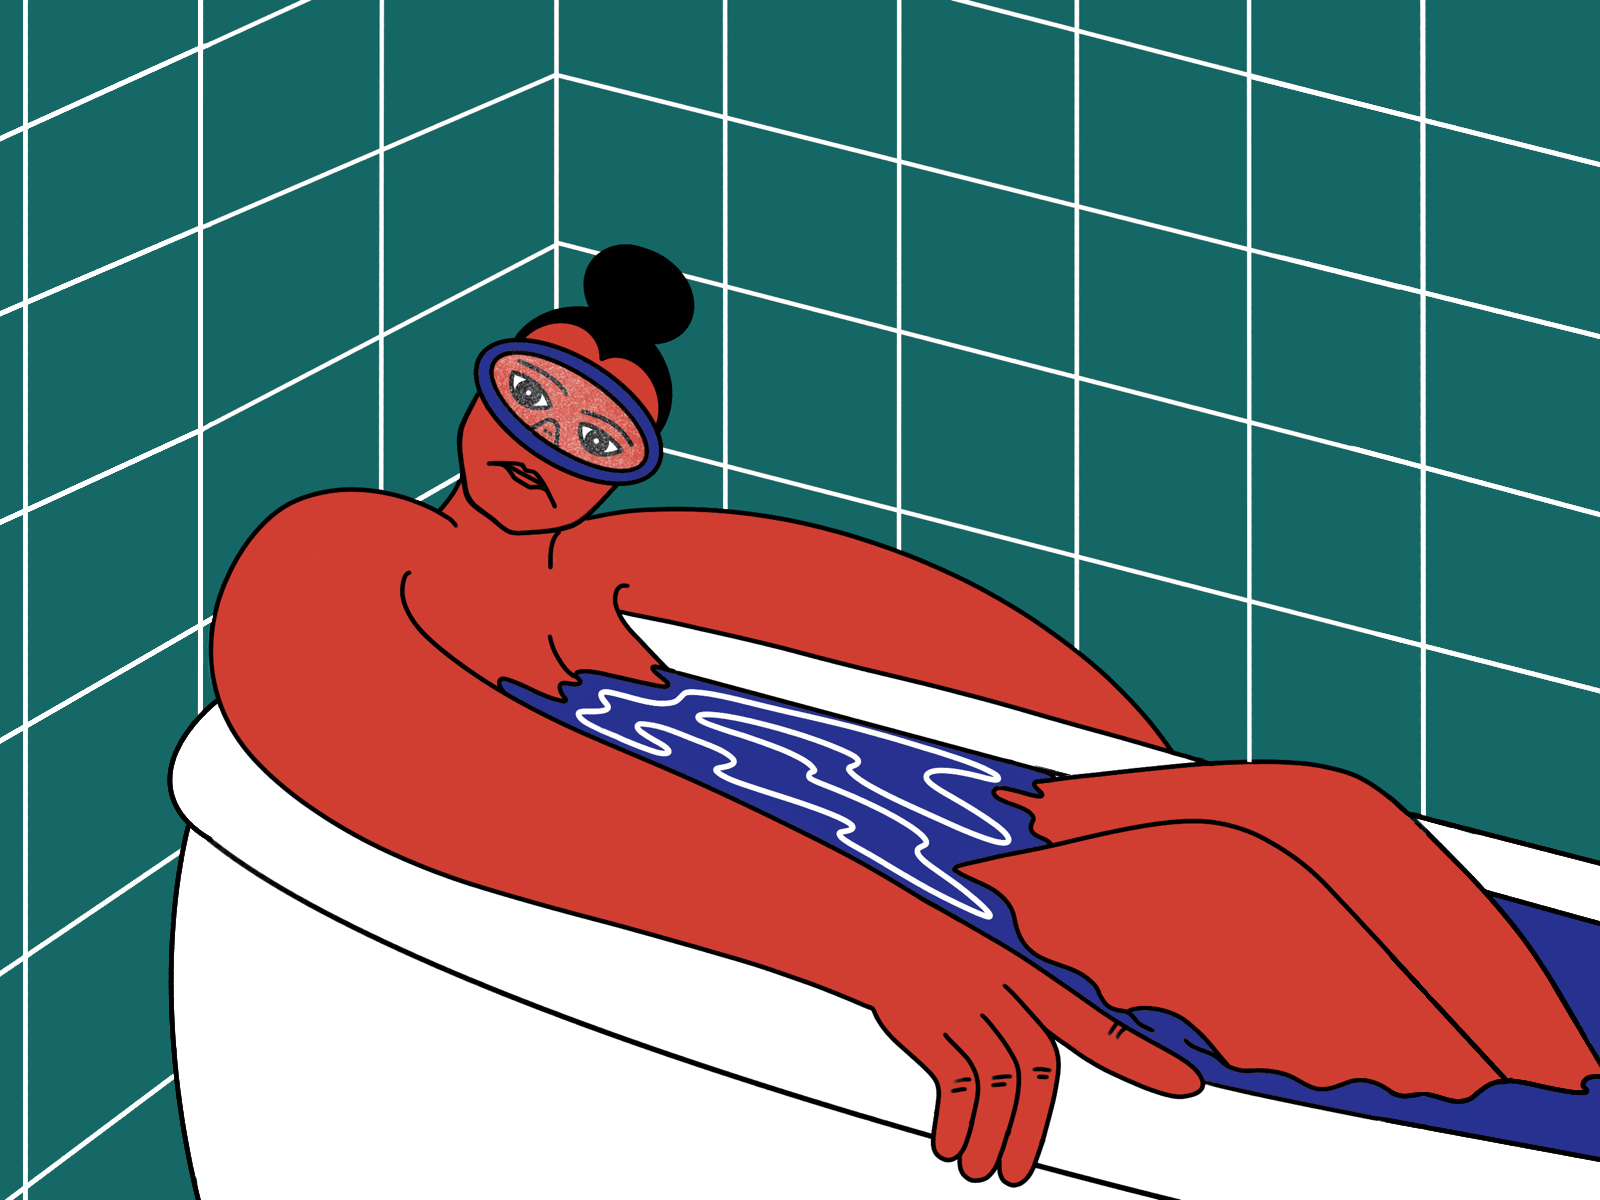 My way of partying on Friday bath bathtub color friday gif illustration introvert mood people woman